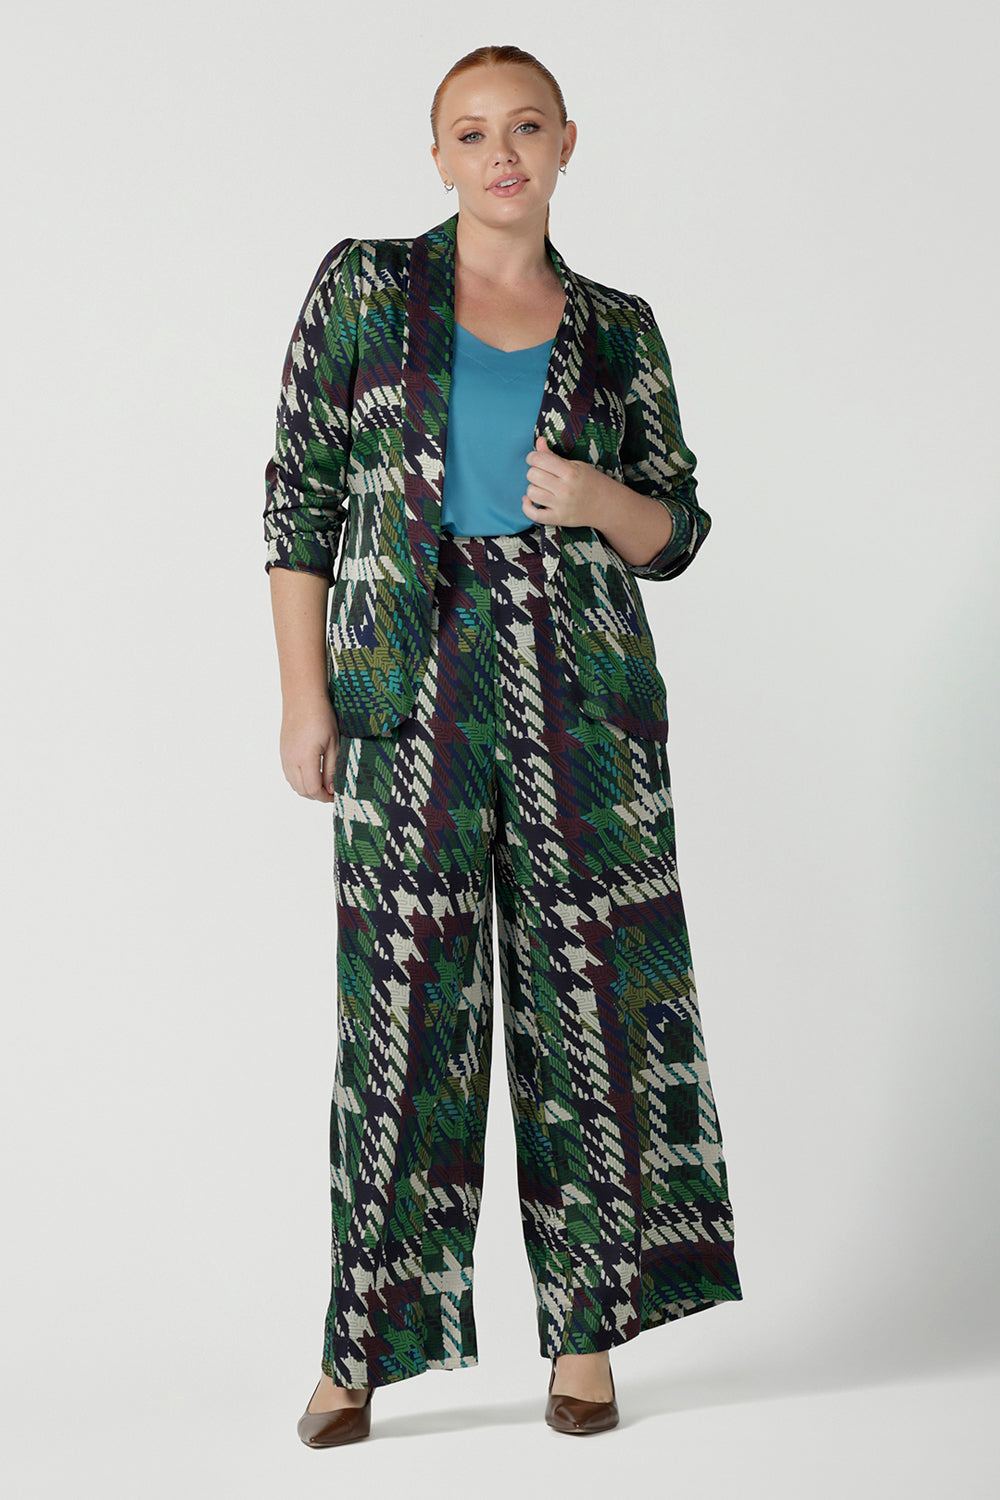 Size 12 woman wears a matching power suit in silk like fabric Italian Viscose. Tailored jacket and pants with soft tailoring details. Made in Australia for women size 8 - 24.